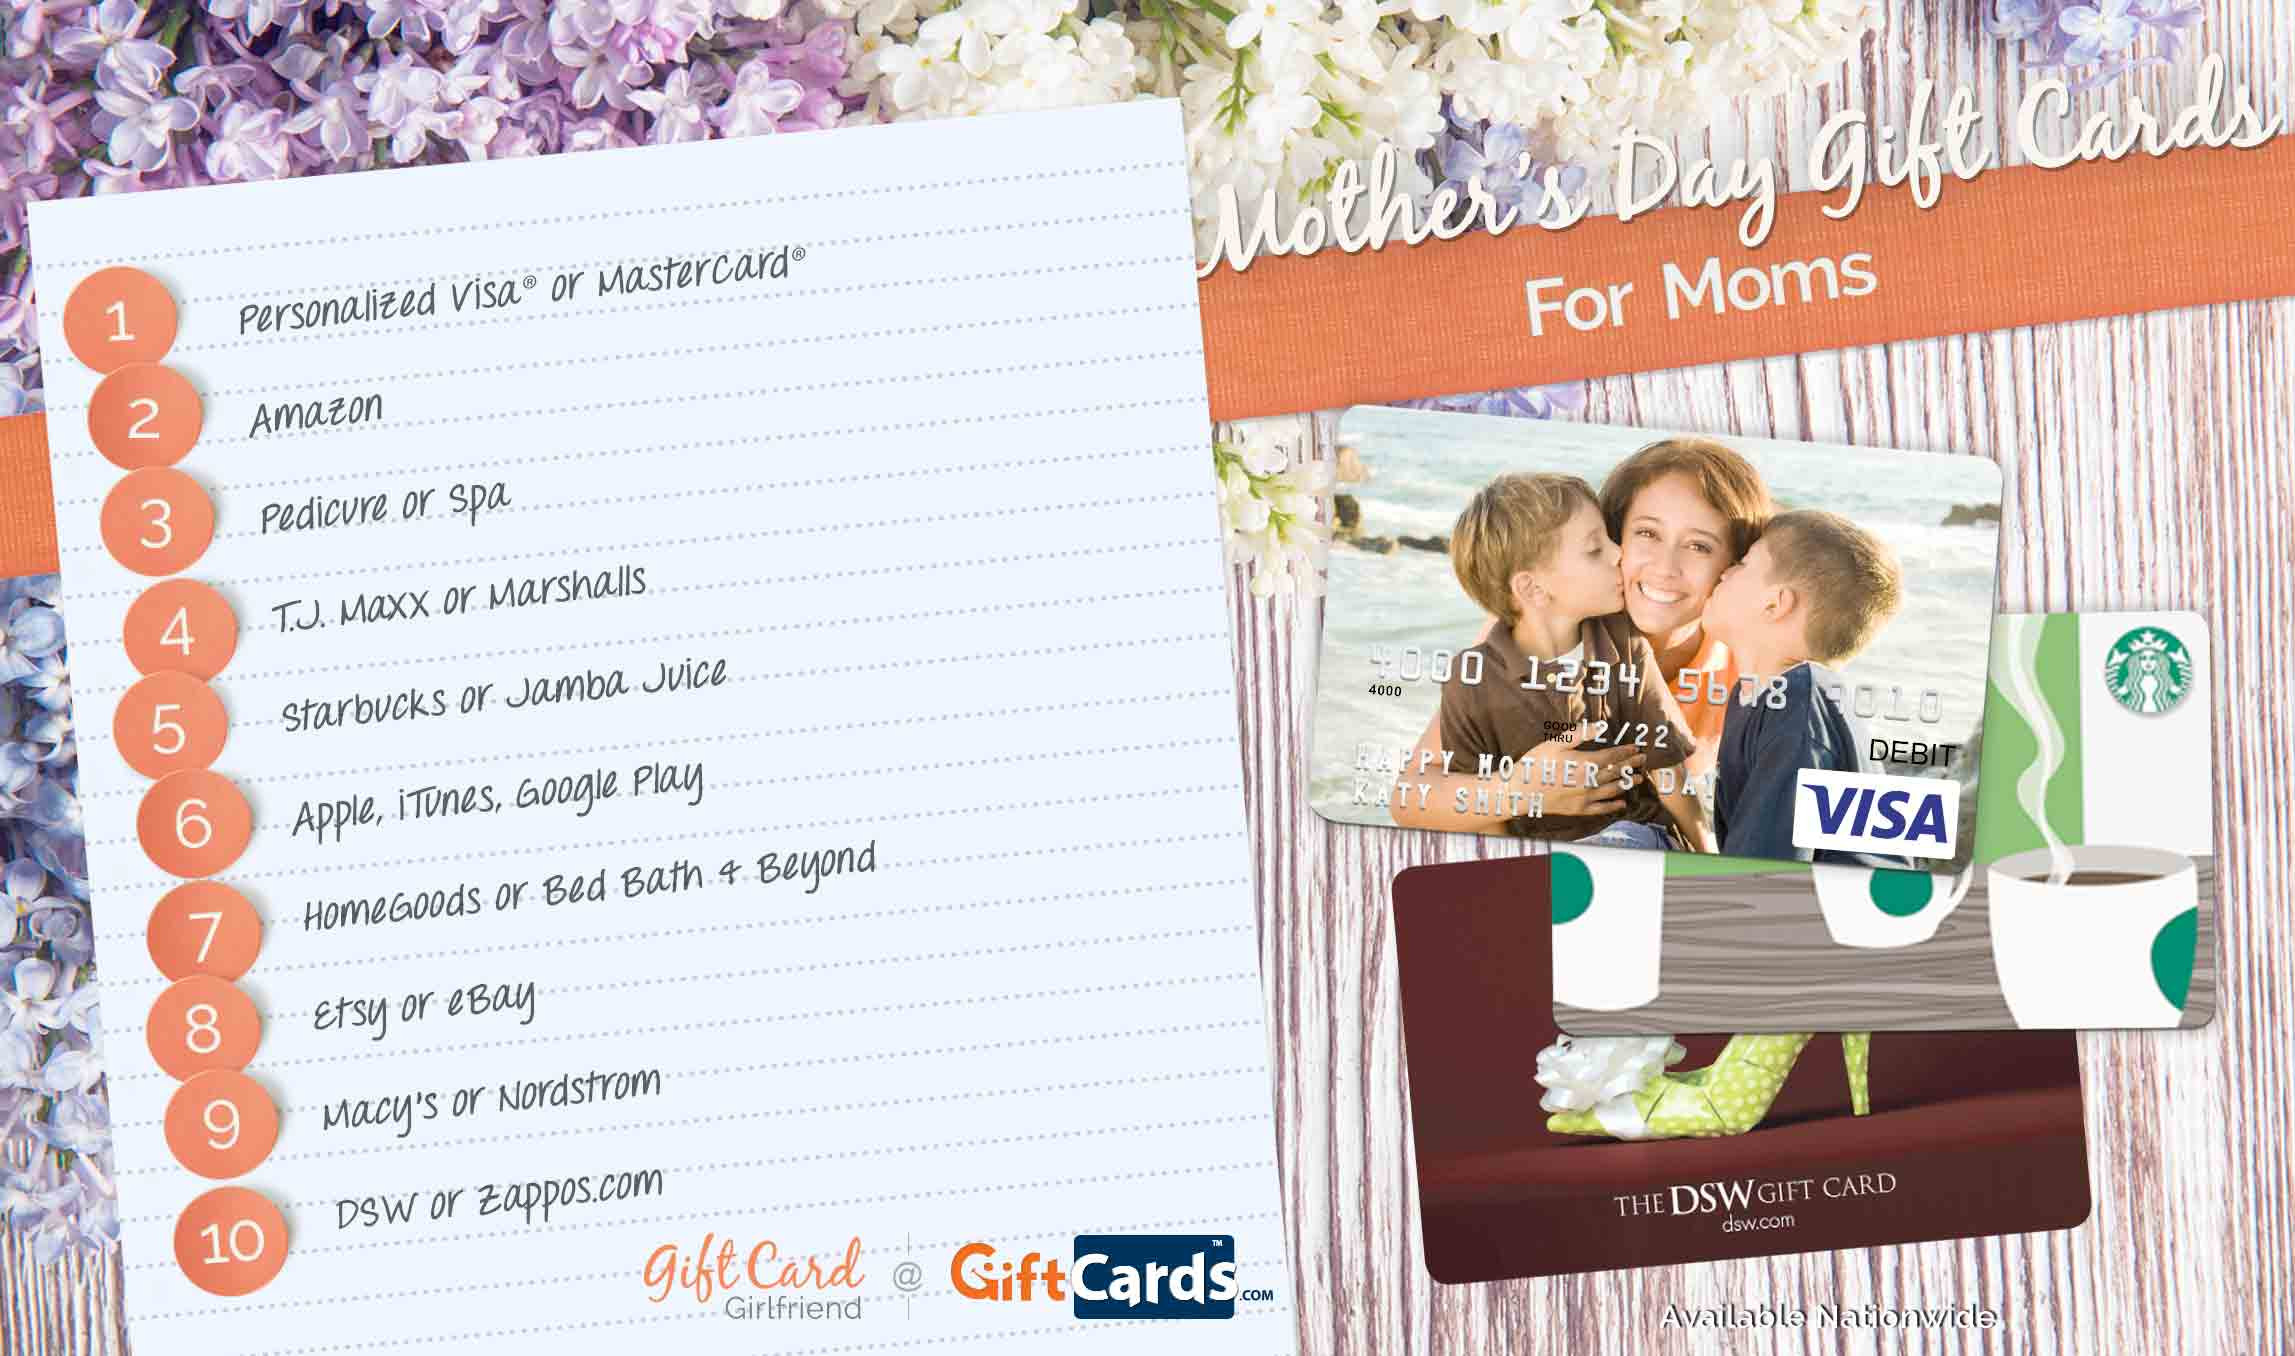 Best Mothers Day Gifts For New Moms
 Top 10 Mother s Day Gift Cards for Mom